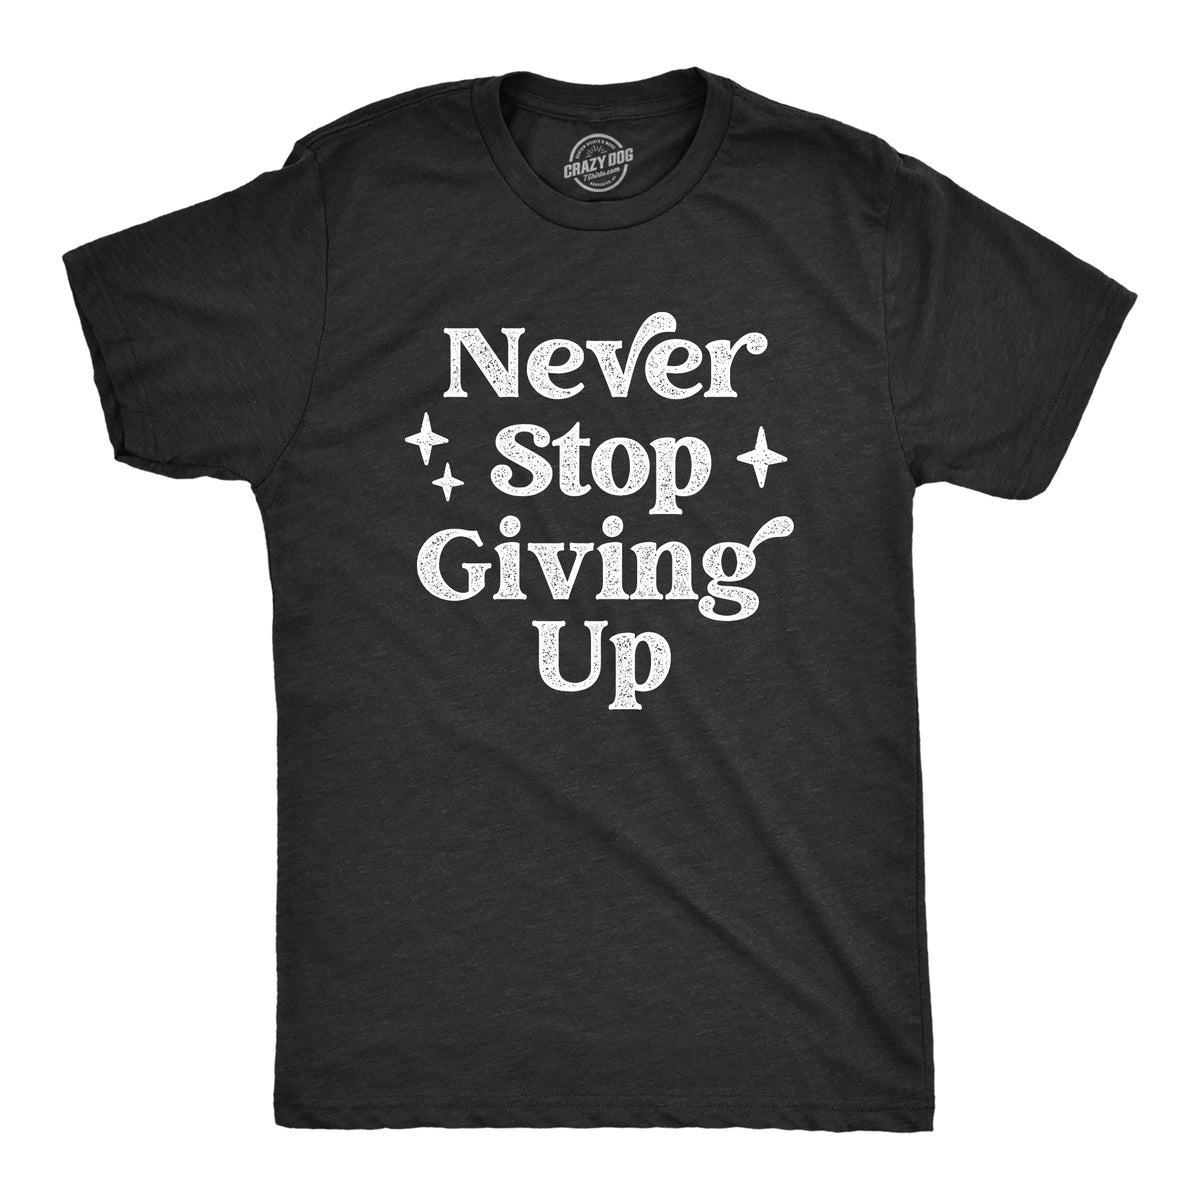 Funny Heather Black - GIVINGUP Never Stop Giving Up Mens T Shirt Nerdy Sarcastic Tee